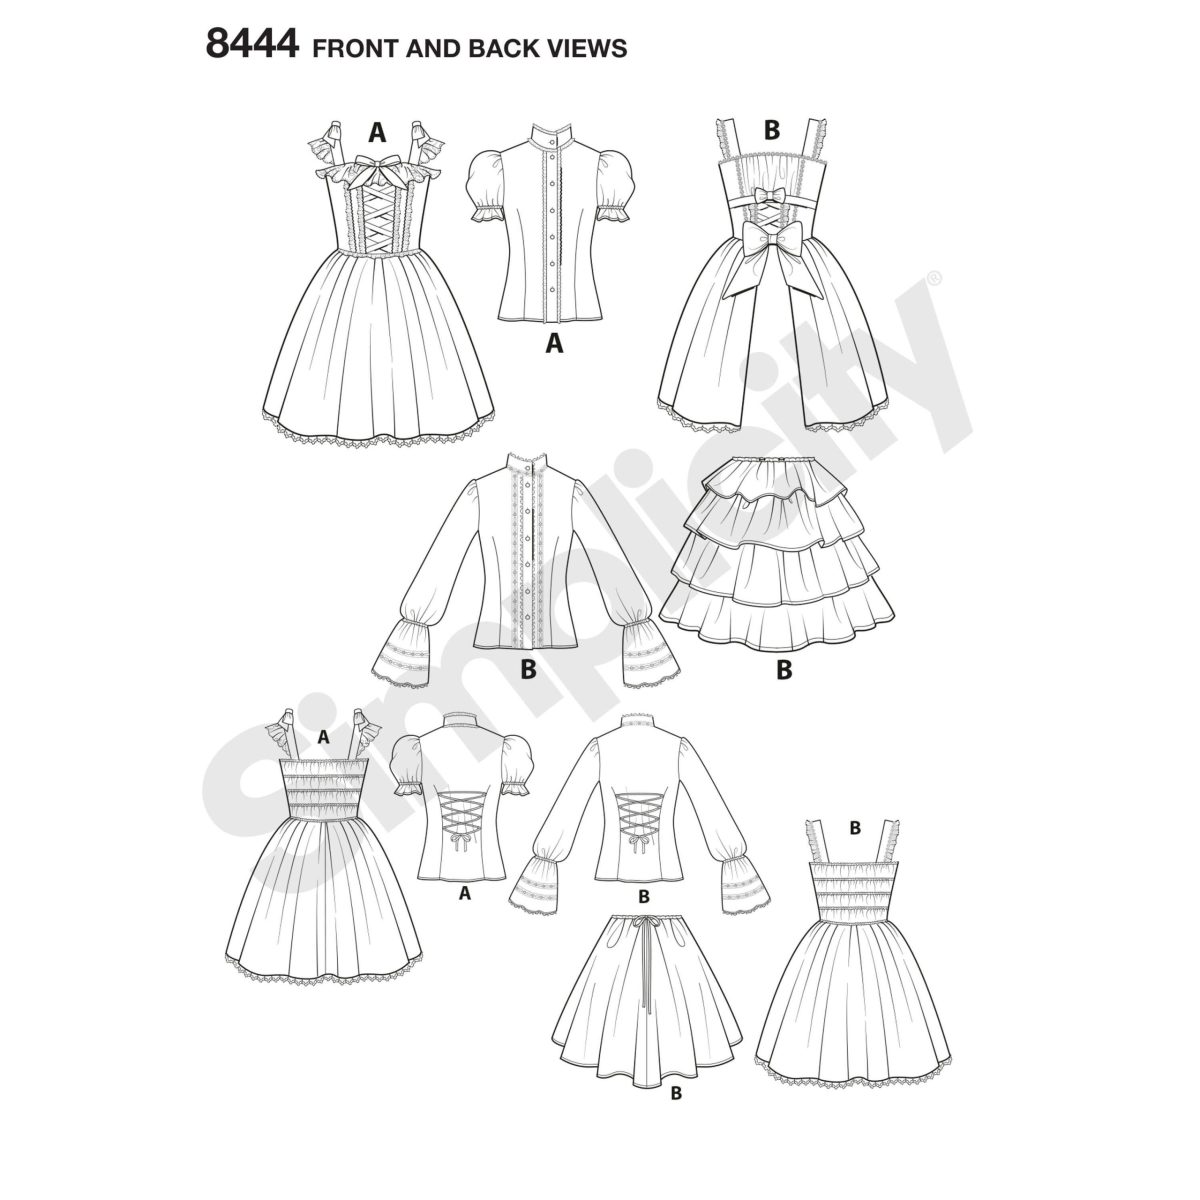 Simplicity Sewing Pattern 8444 Misses' Ruffled Dress Costume